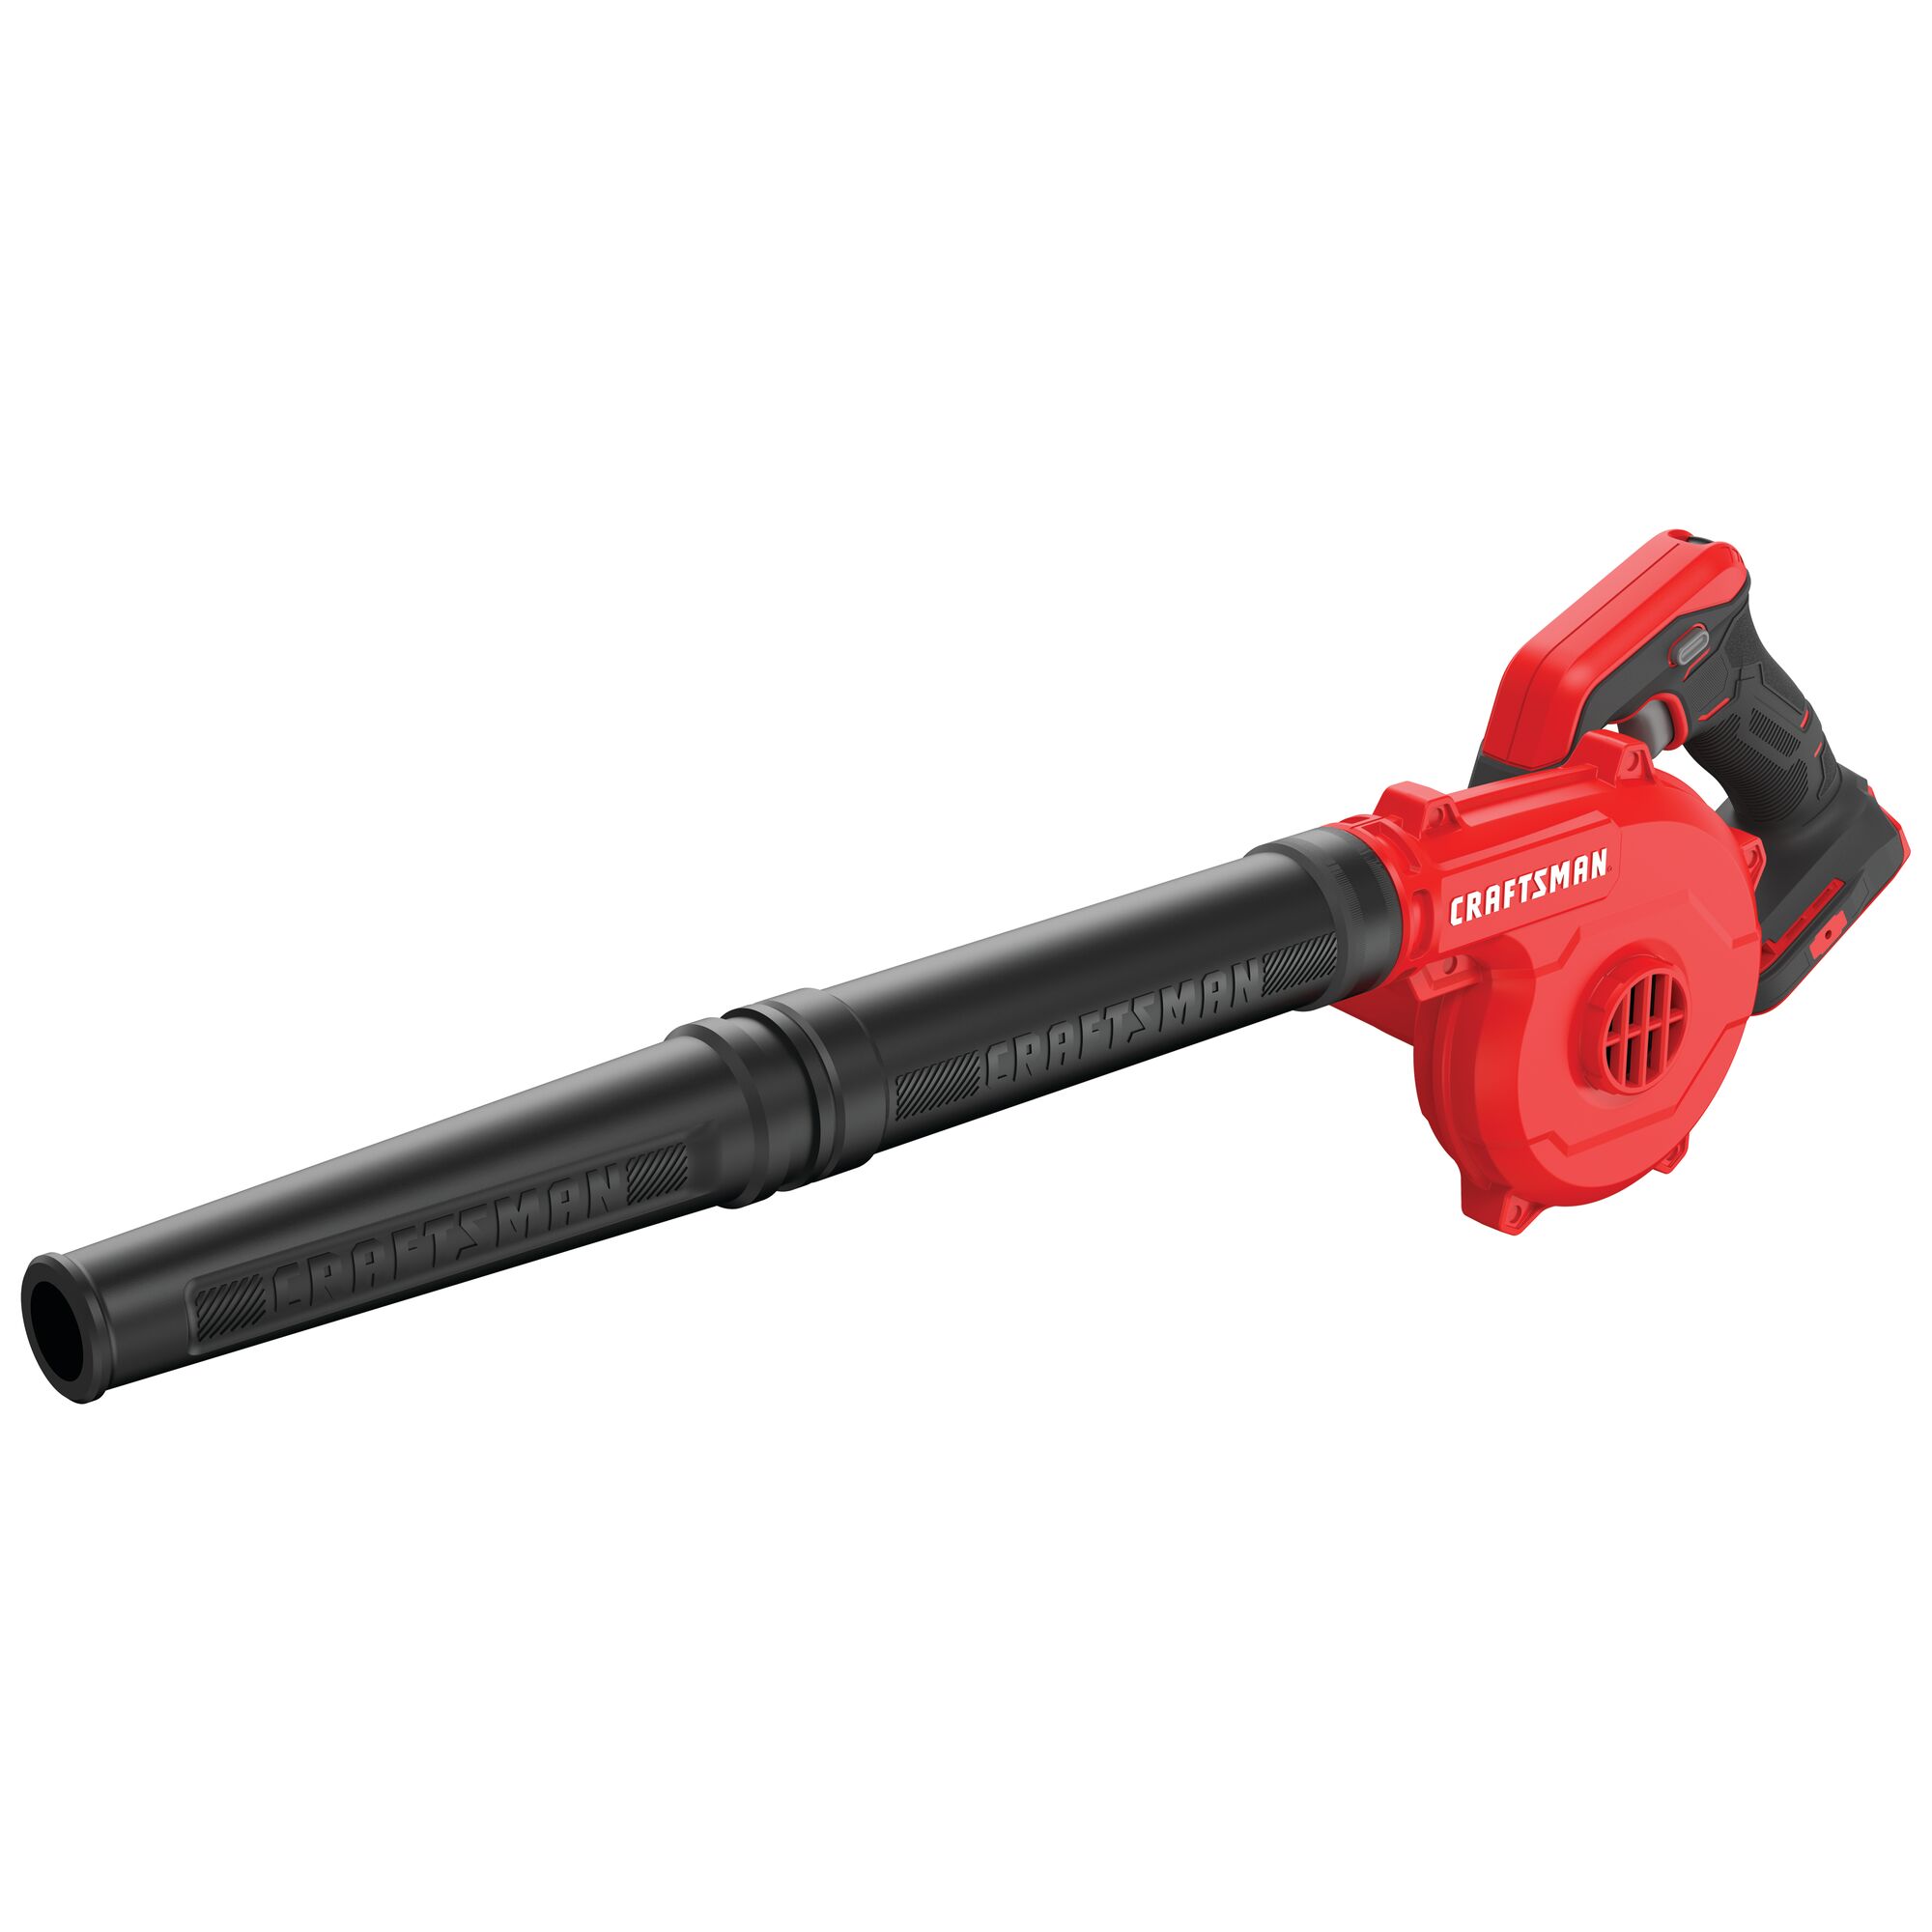 Cordless compact blower.